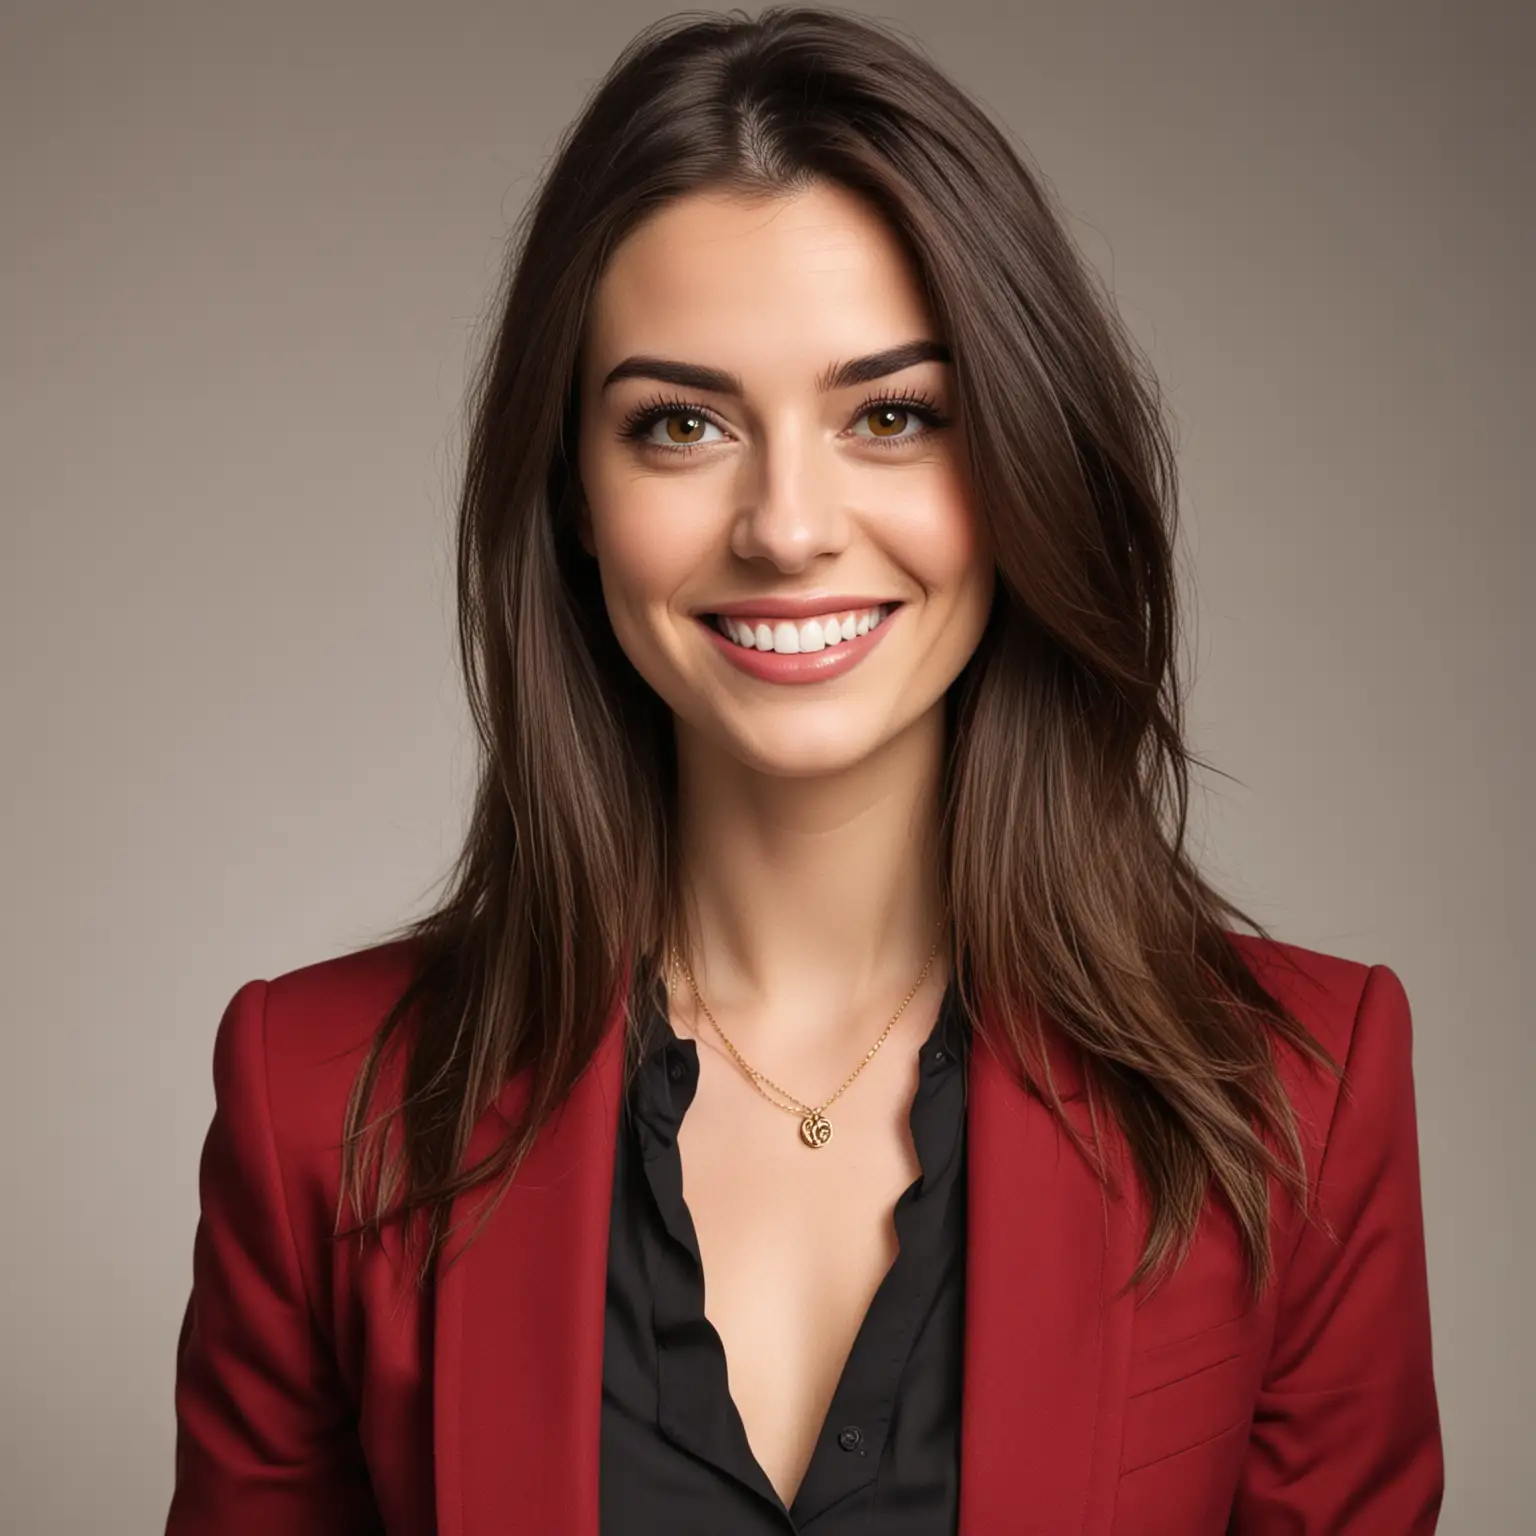 Stylish 30YearOld Woman in Red Blazer and Gold Necklace Smiling